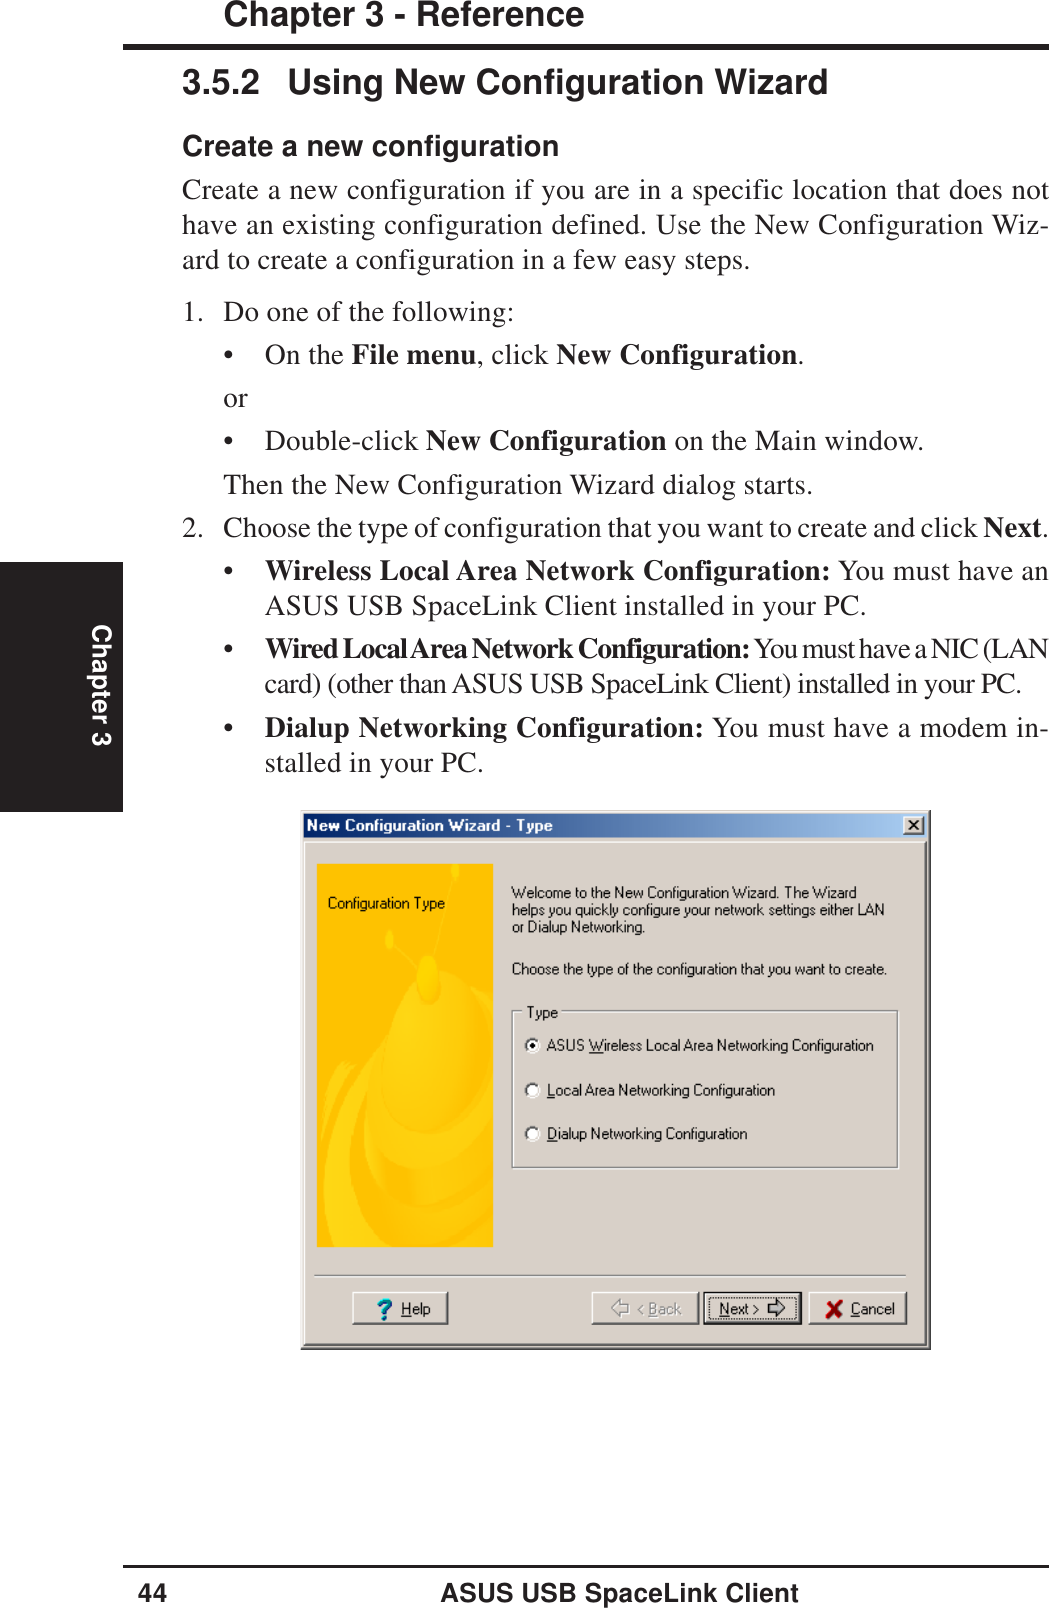 44 ASUS USB SpaceLink ClientChapter 3 - ReferenceChapter 33.5.2 Using New Configuration WizardCreate a new configurationCreate a new configuration if you are in a specific location that does nothave an existing configuration defined. Use the New Configuration Wiz-ard to create a configuration in a few easy steps.1. Do one of the following:• On the File menu, click New Configuration.or• Double-click New Configuration on the Main window.Then the New Configuration Wizard dialog starts.2. Choose the type of configuration that you want to create and click Next.•Wireless Local Area Network Configuration: You must have anASUS USB SpaceLink Client installed in your PC.•Wired Local Area Network Configuration: You must have a NIC (LANcard) (other than ASUS USB SpaceLink Client) installed in your PC.•Dialup Networking Configuration: You must have a modem in-stalled in your PC.